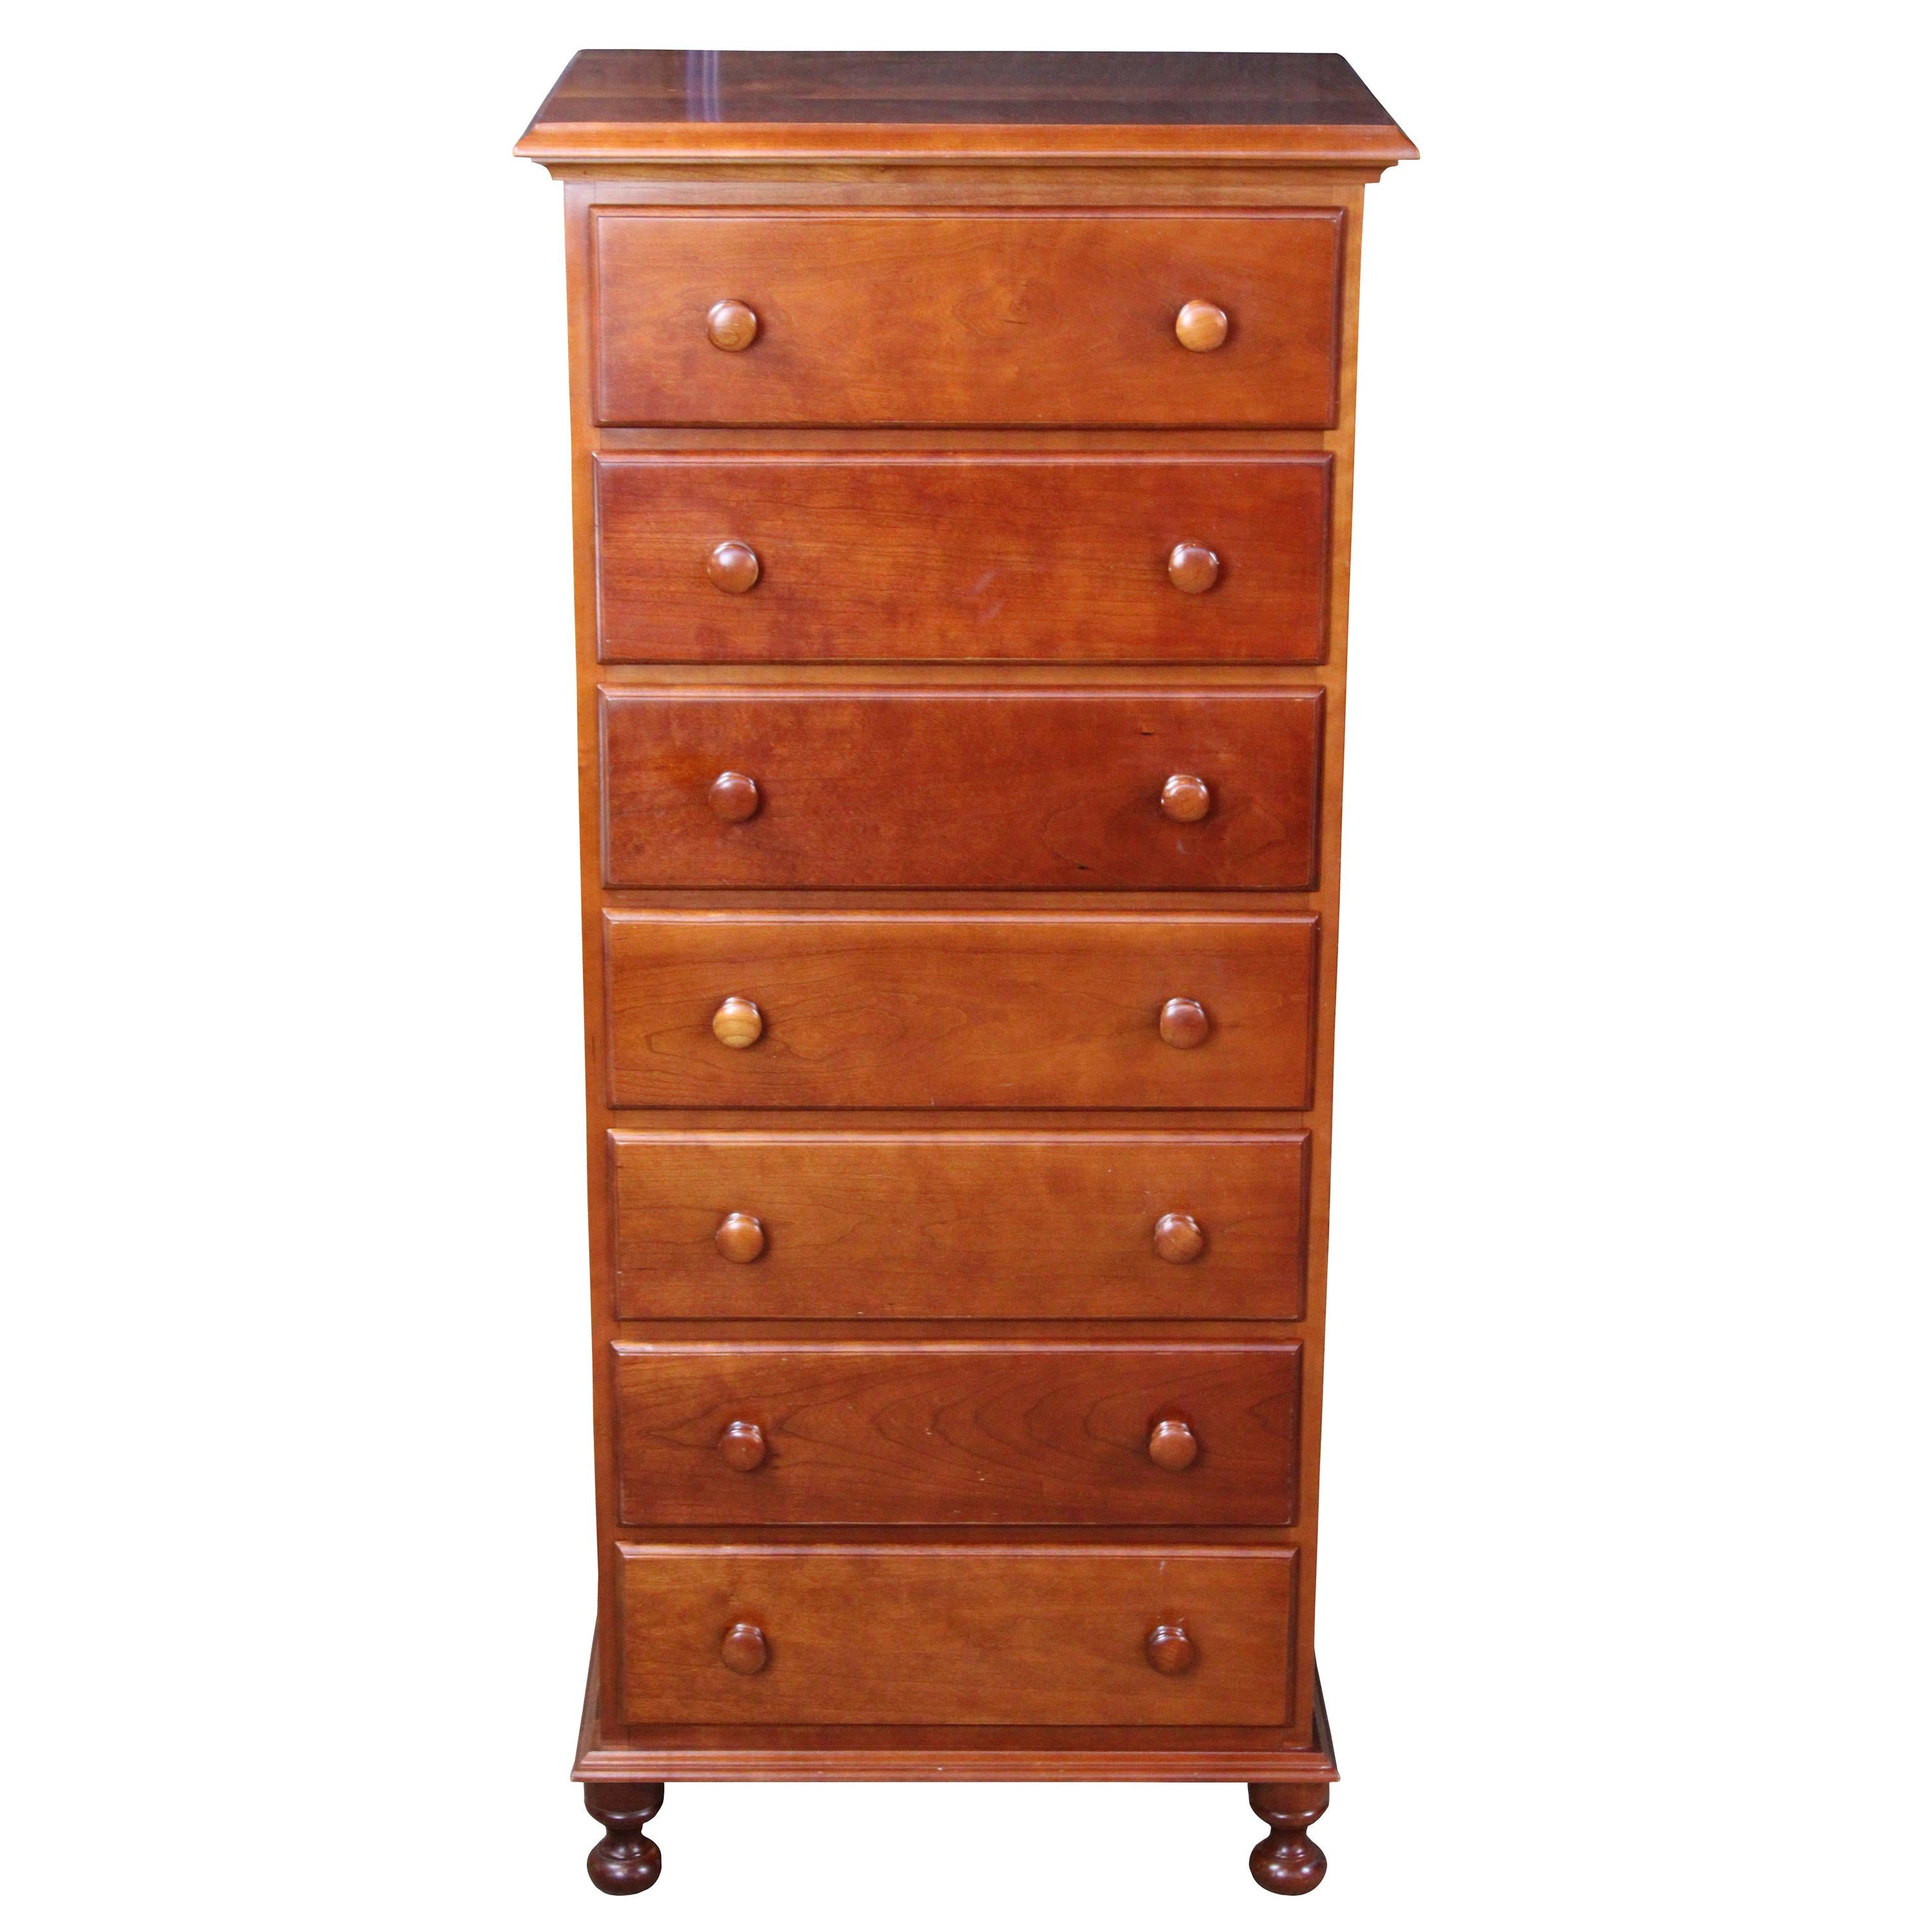 Cassady Furniture Early American Solid Cherry 7 Drawer Lingerie Semainier Chest